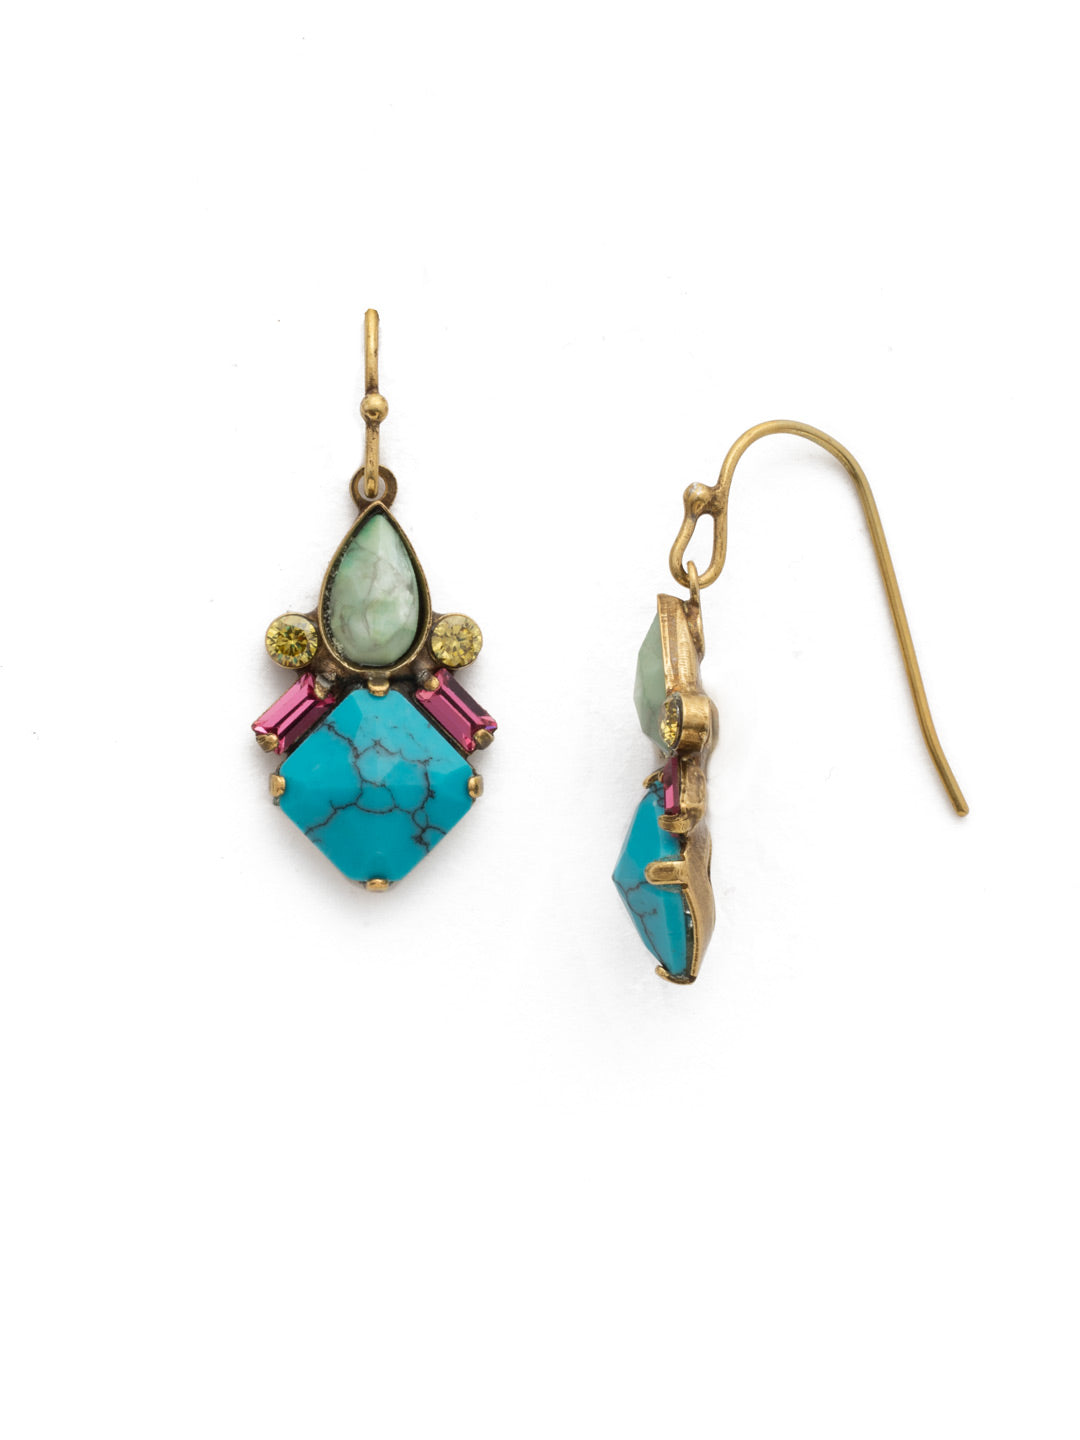 Cassia Earring - EDR9AGBOT - Slim baguettes and petite crystal rounds nestle between pear and diamond-shaped cabochons for a modern mixture of semi-precious and sparkle.